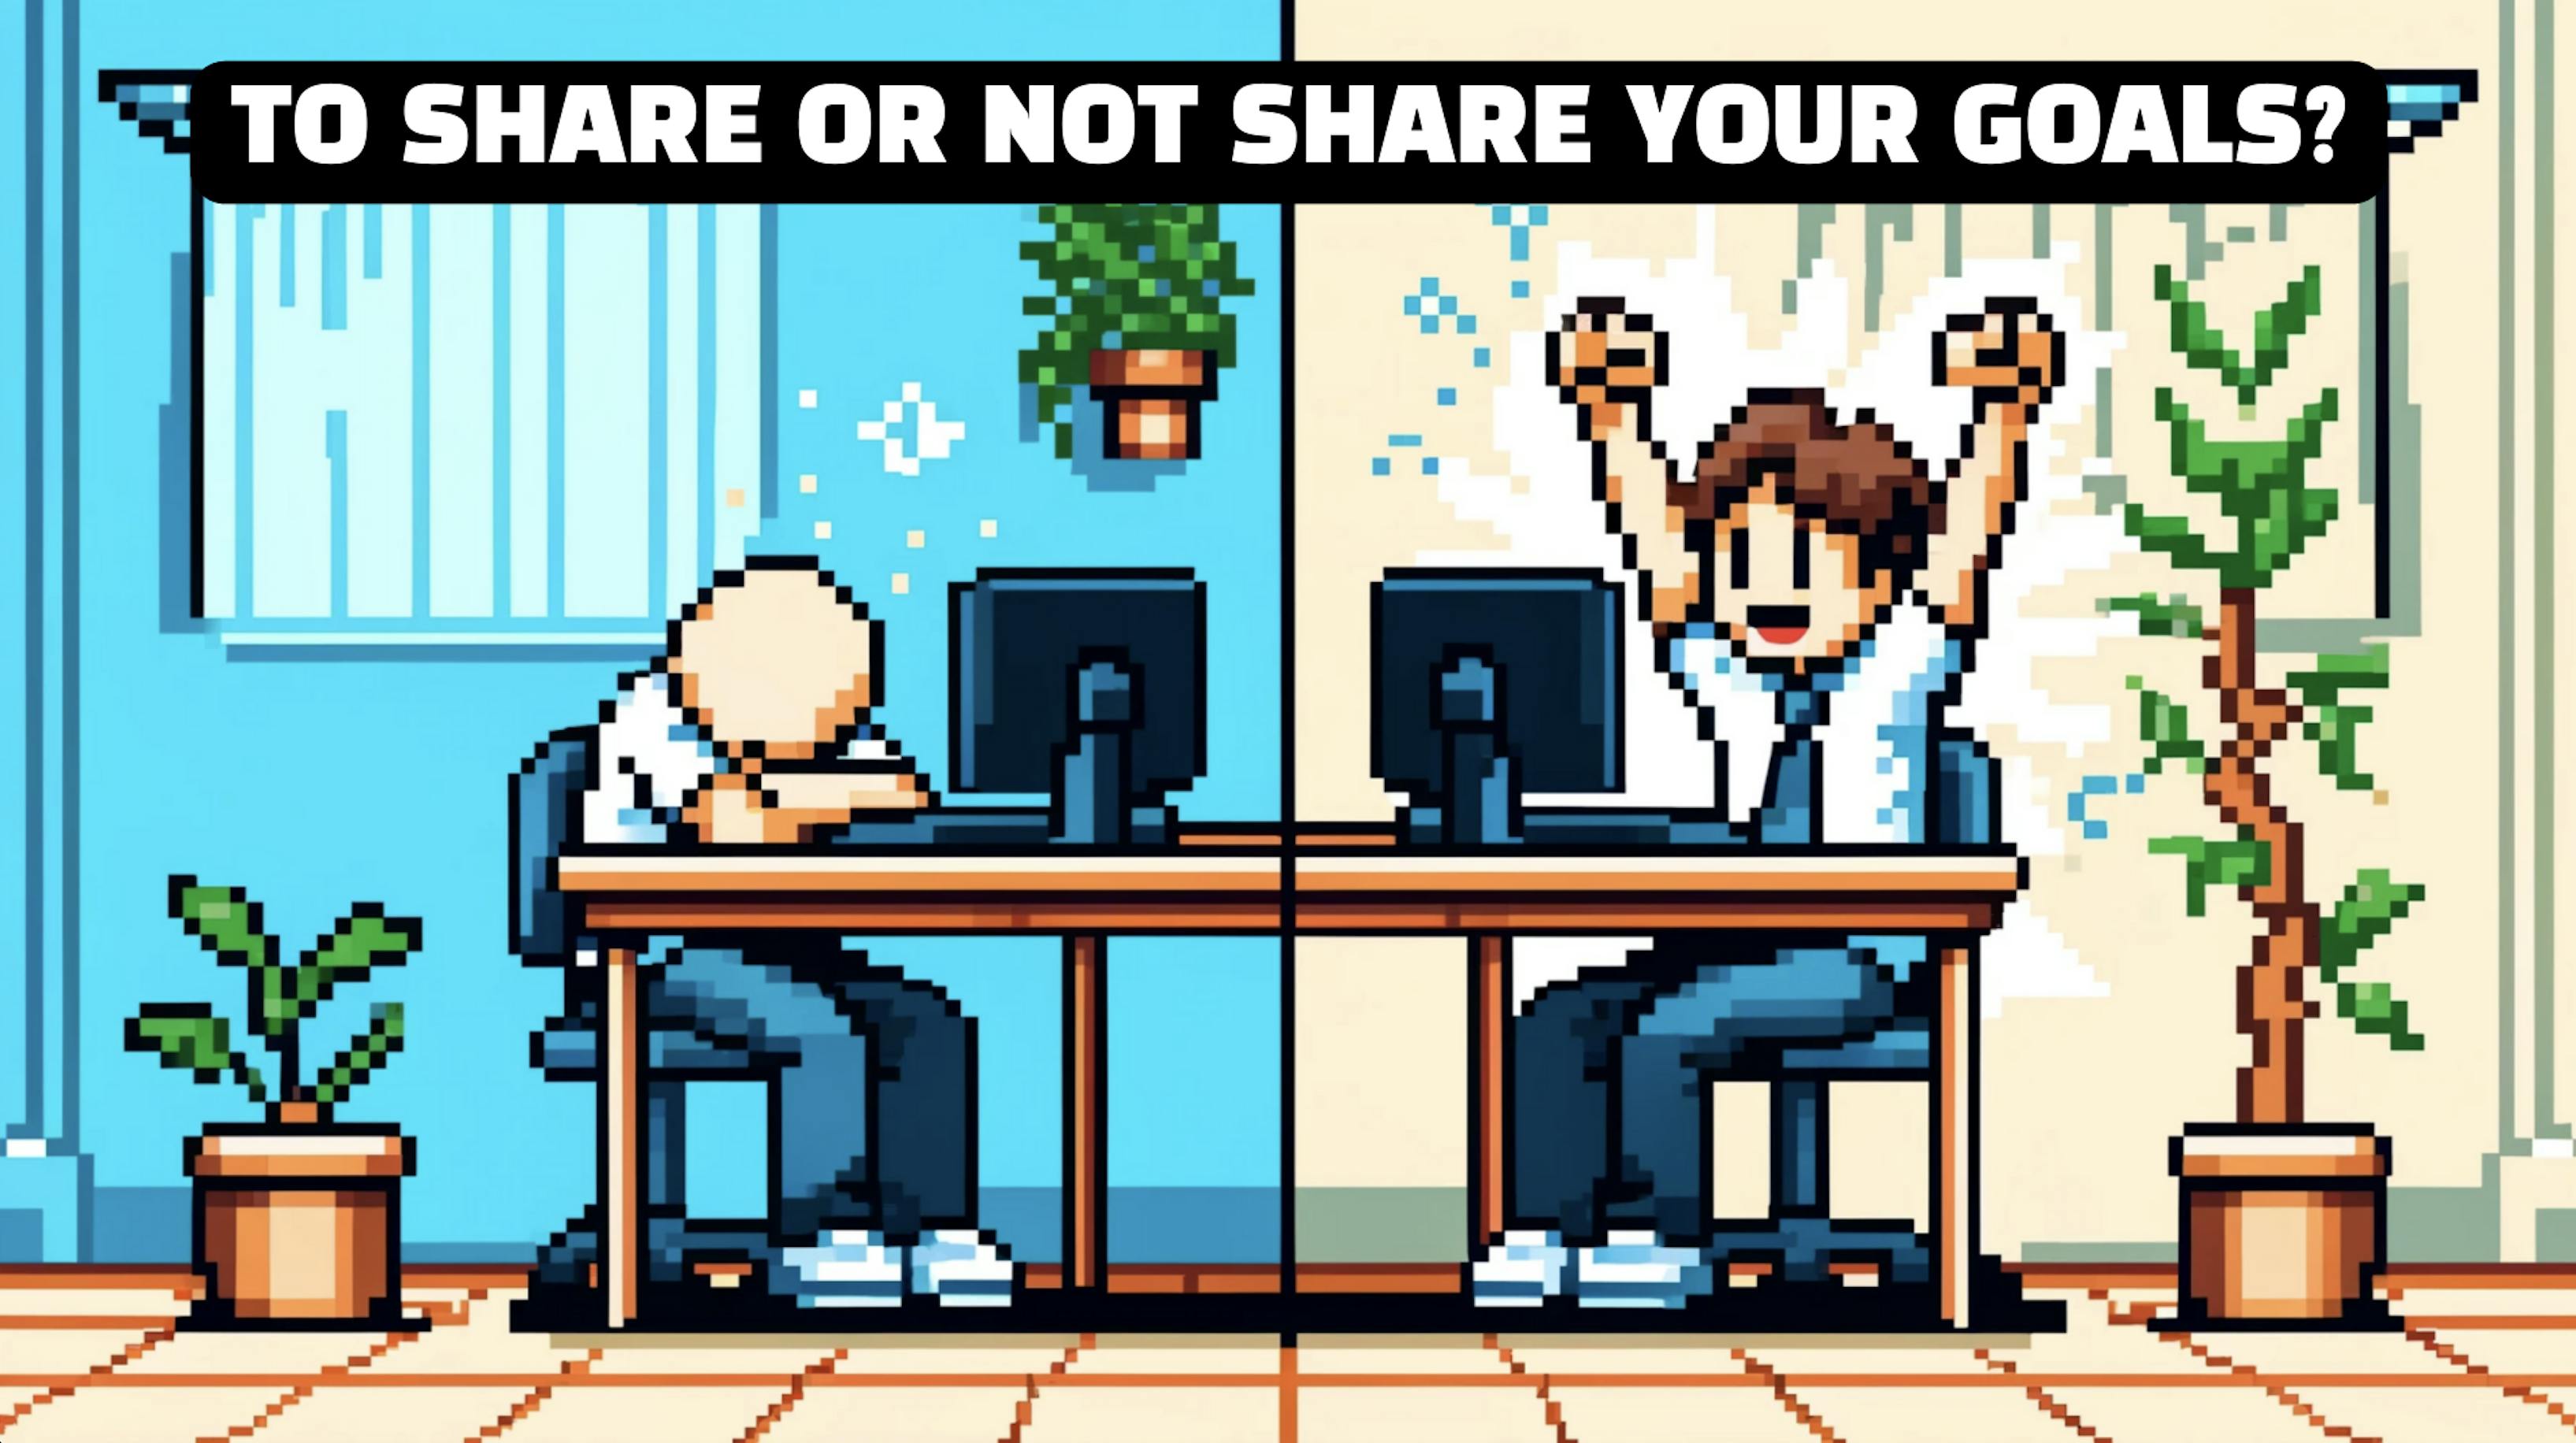 An AI-generated 16-bit image of two guys at a desk, each with a computer in front of them. The guy on the left has his head down on the desk. The guy on the right has his arms raised in victory. The text reads "To share or not to share your goals?"